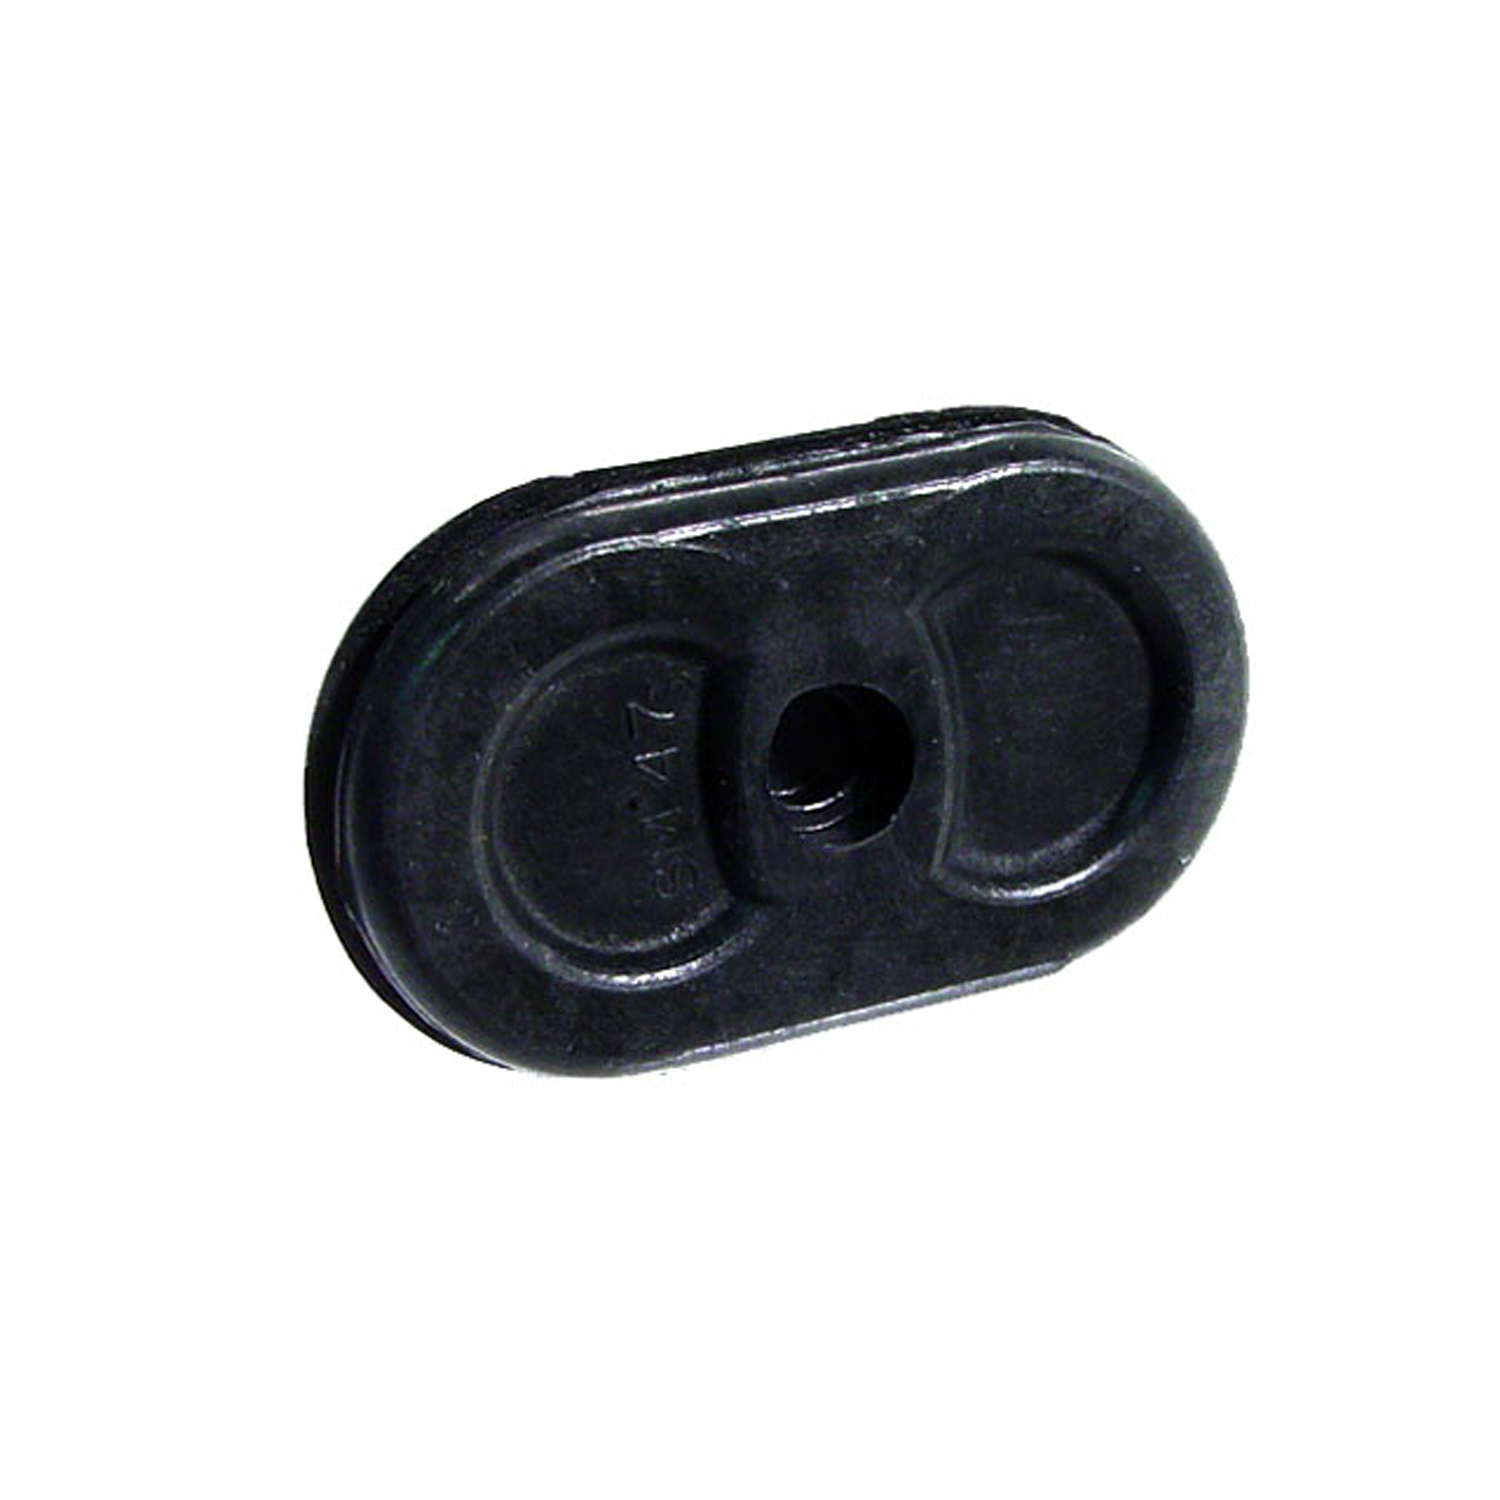 1940 Buick Century Series 60 Speedometer Cable Firewall Grommet.  Fits 1-7/8 long hole-SM 47